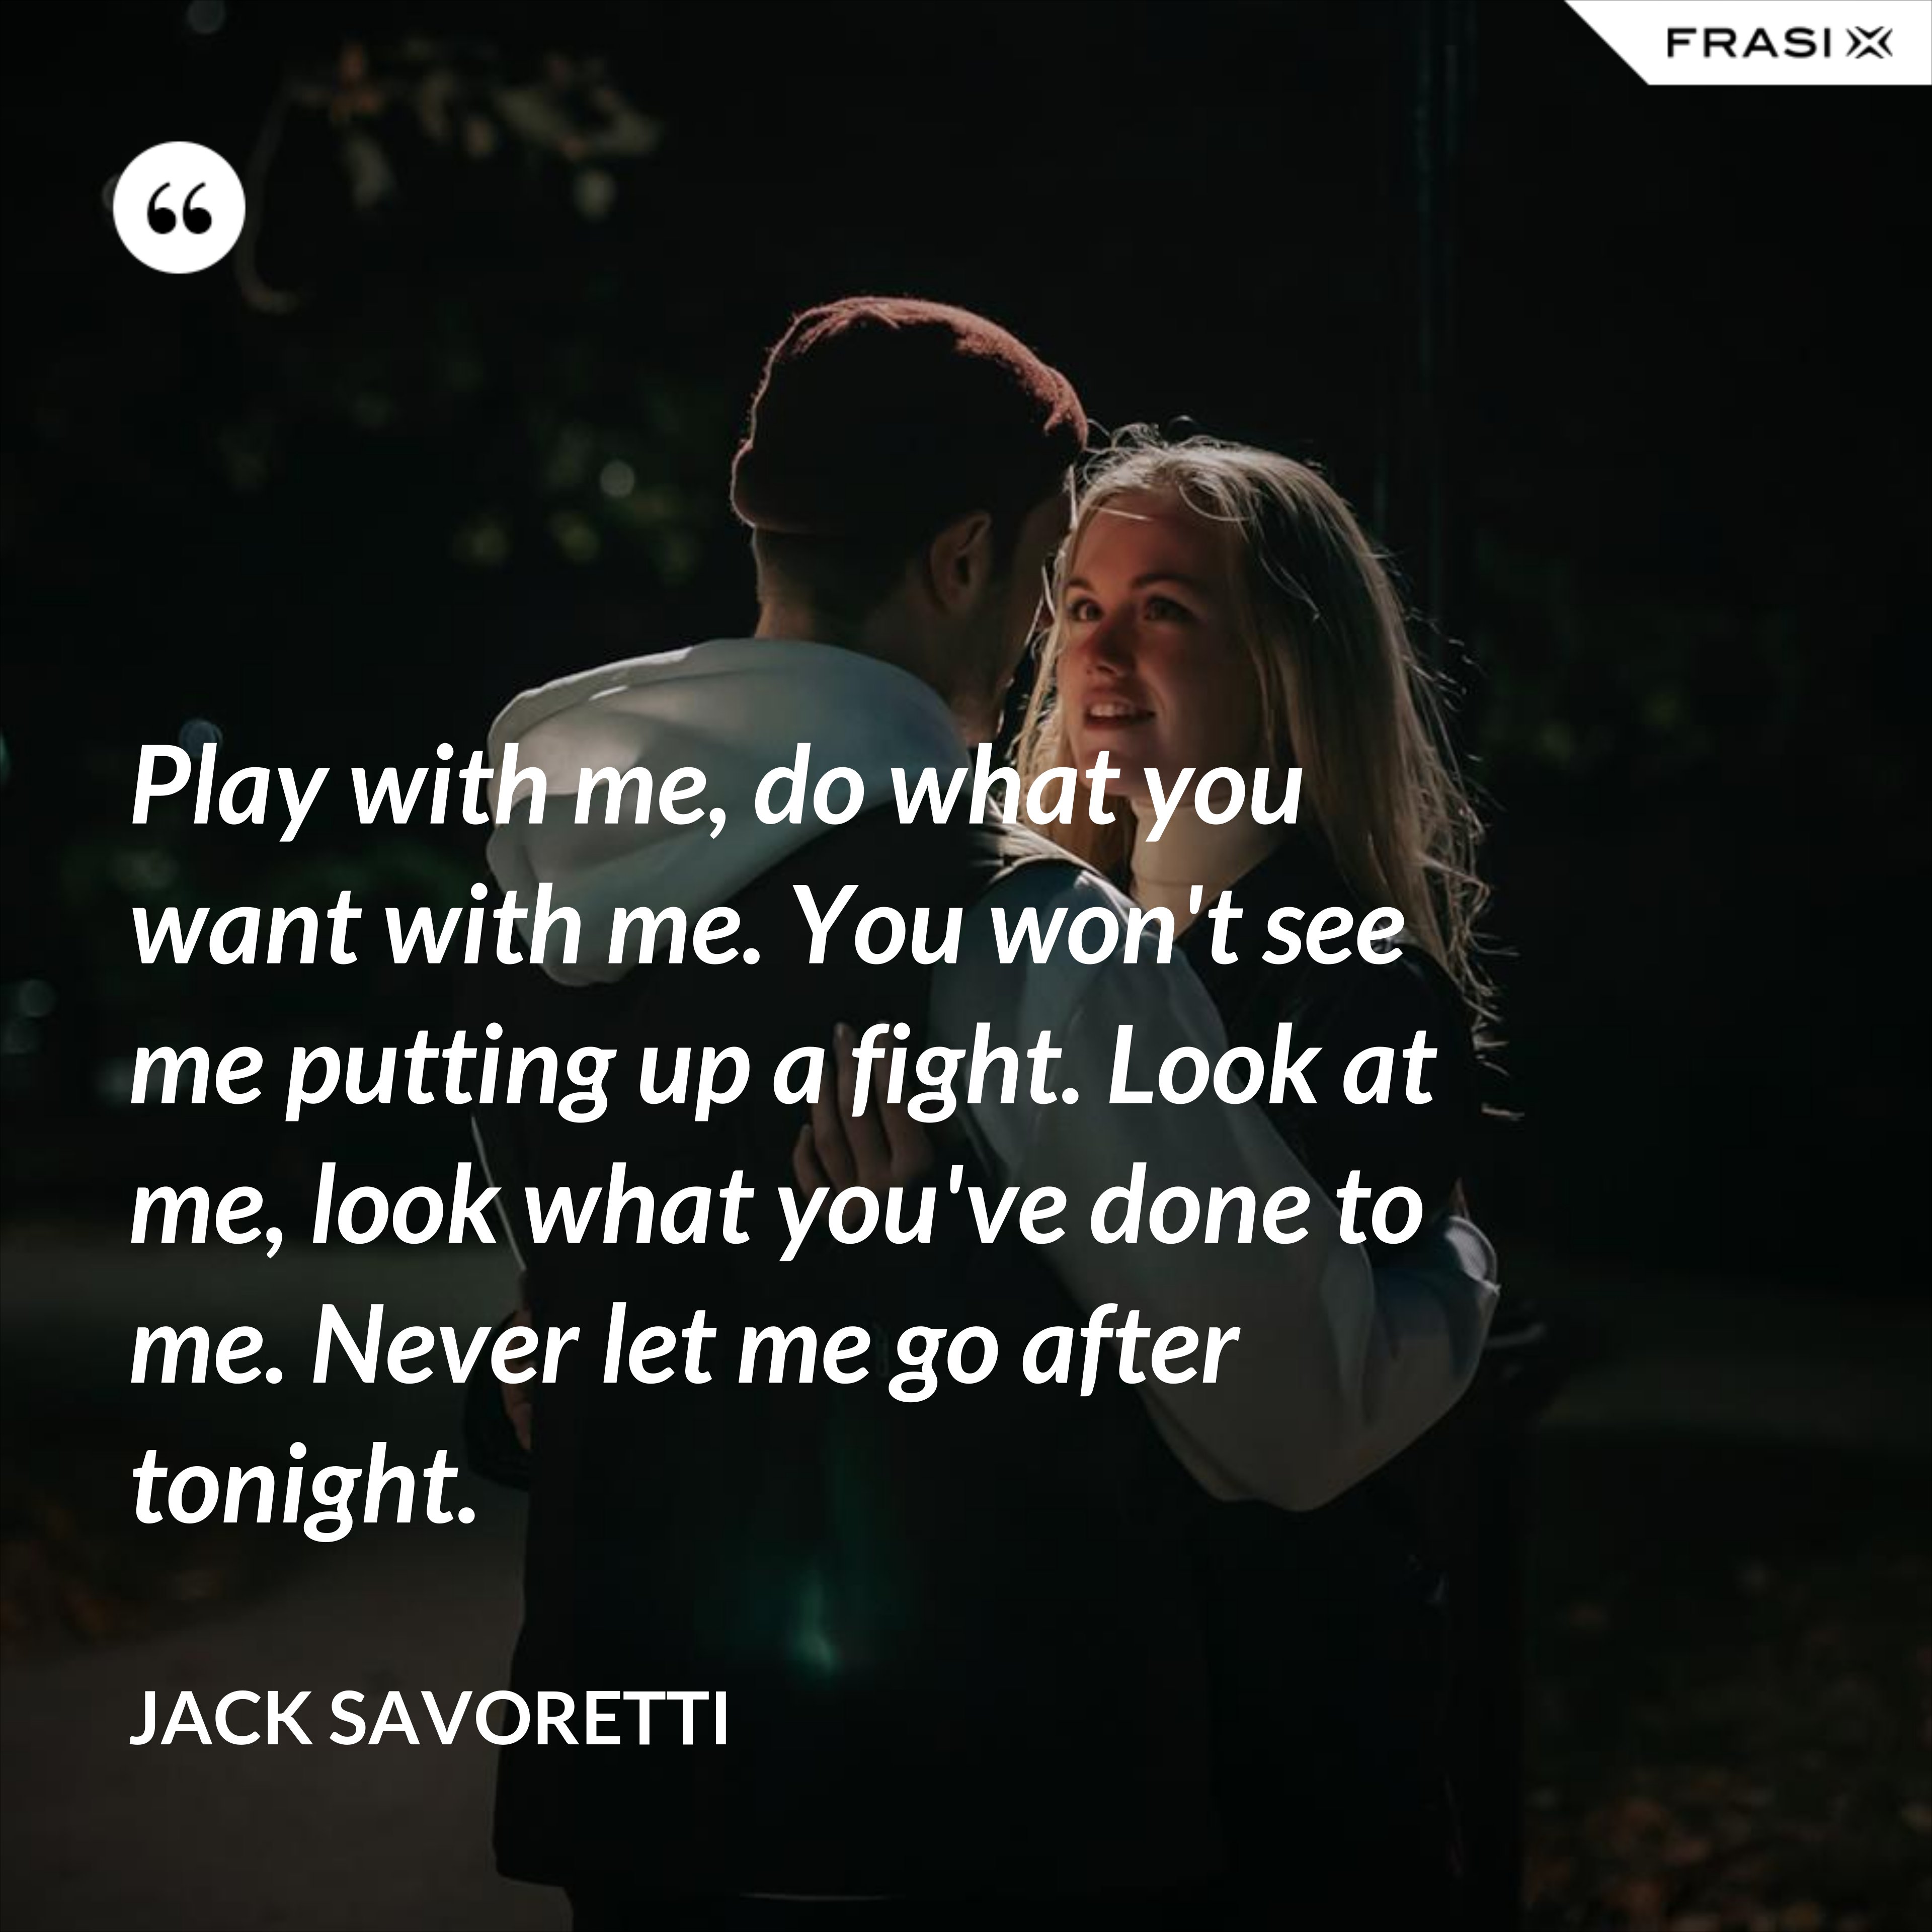 Play with me, do what you want with me. You won't see me putting up a fight. Look at me, look what you've done to me. Never let me go after tonight. - Jack Savoretti